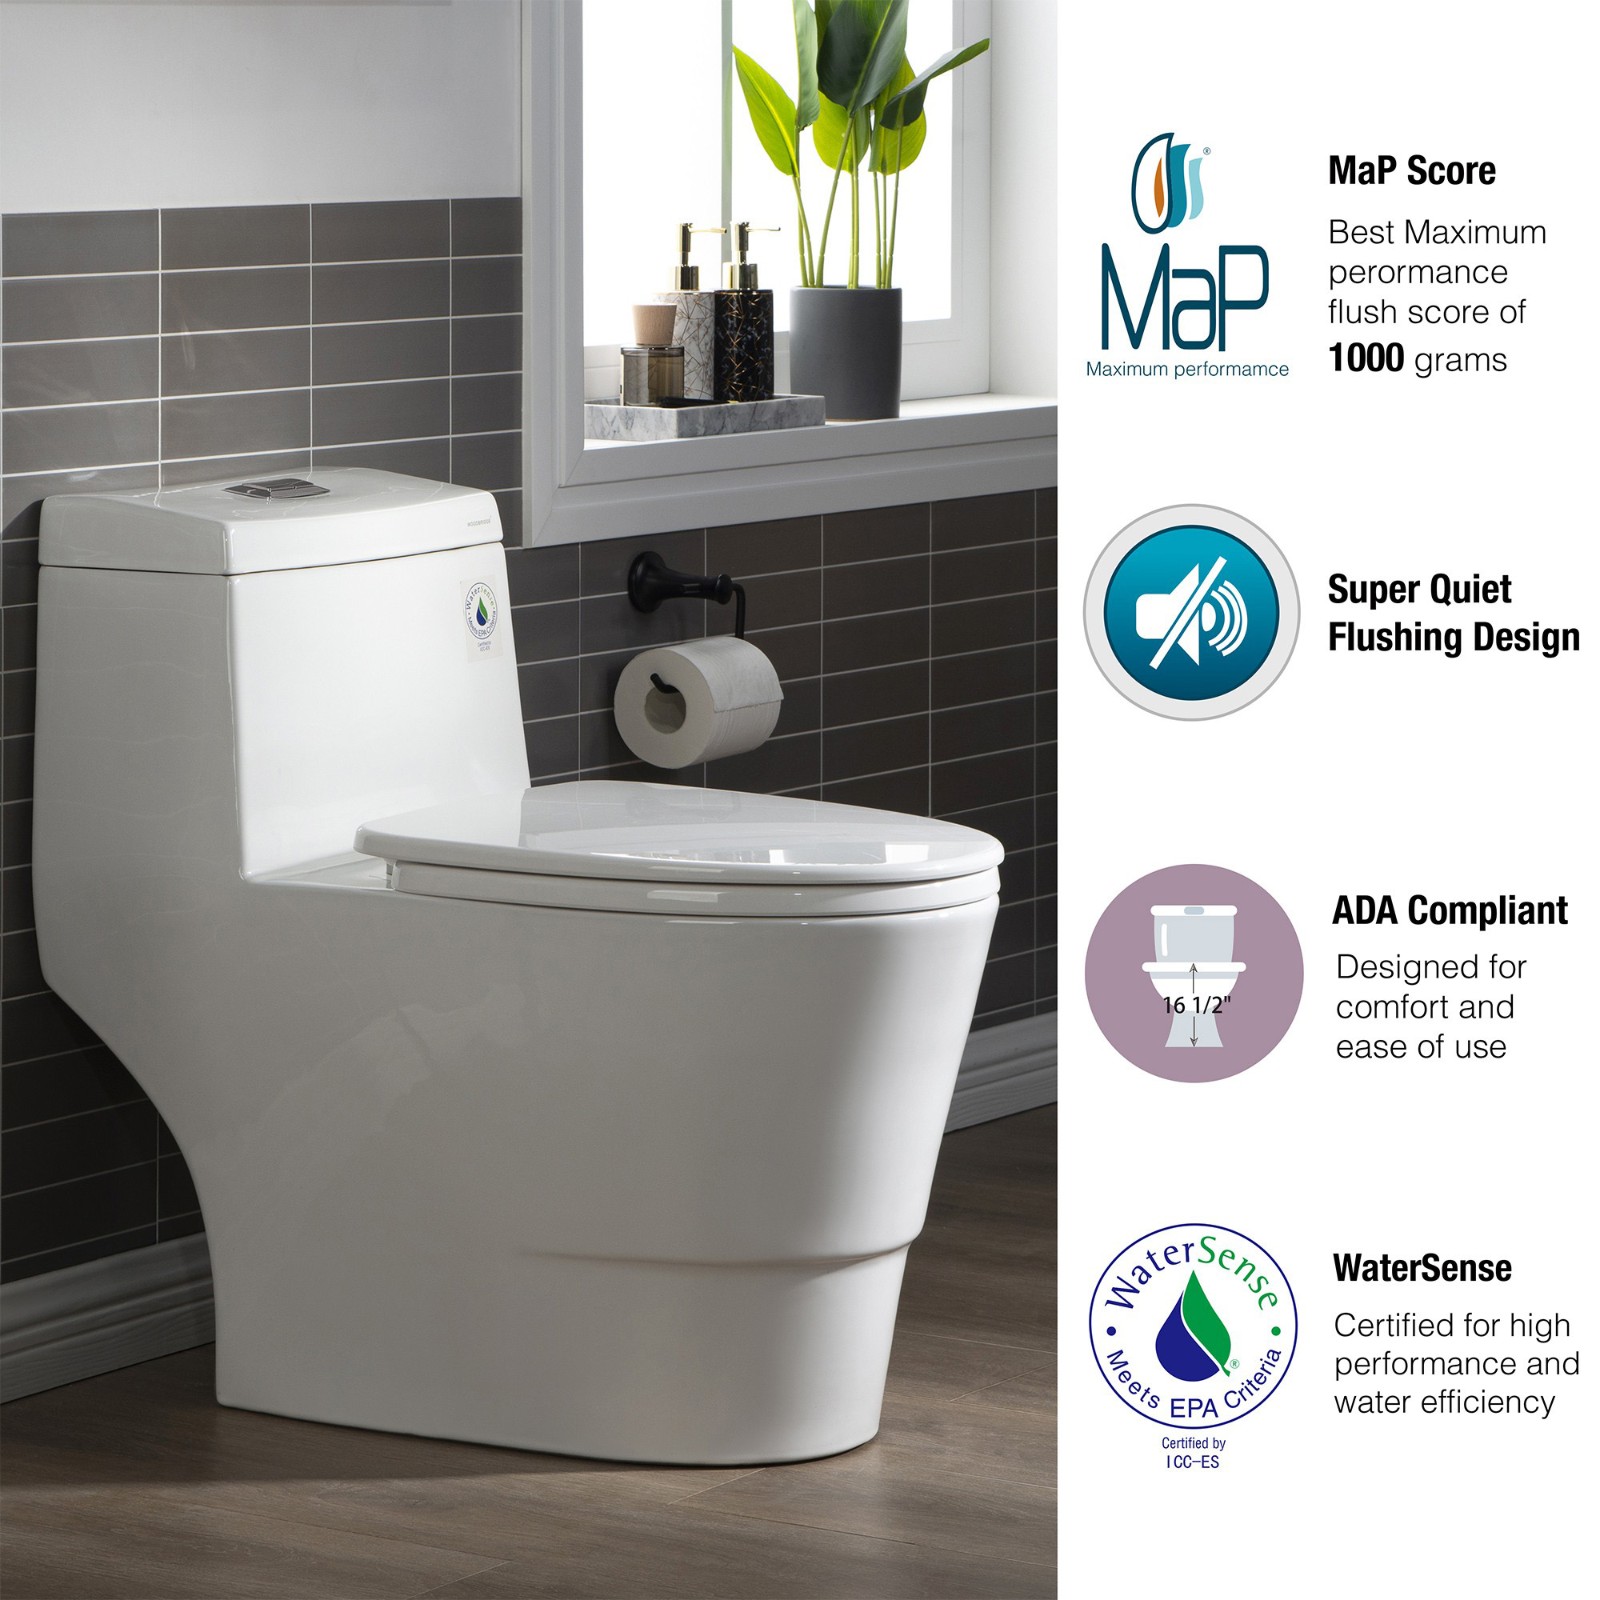  WOODBRIDGEE One Piece Toilet with Soft Closing Seat, Chair Height, 1.28 GPF Dual, Water Sensed, 1000 Gram MaP Flushing Score Toilet with Brushed Nickel Button T0001-BN, White_5727